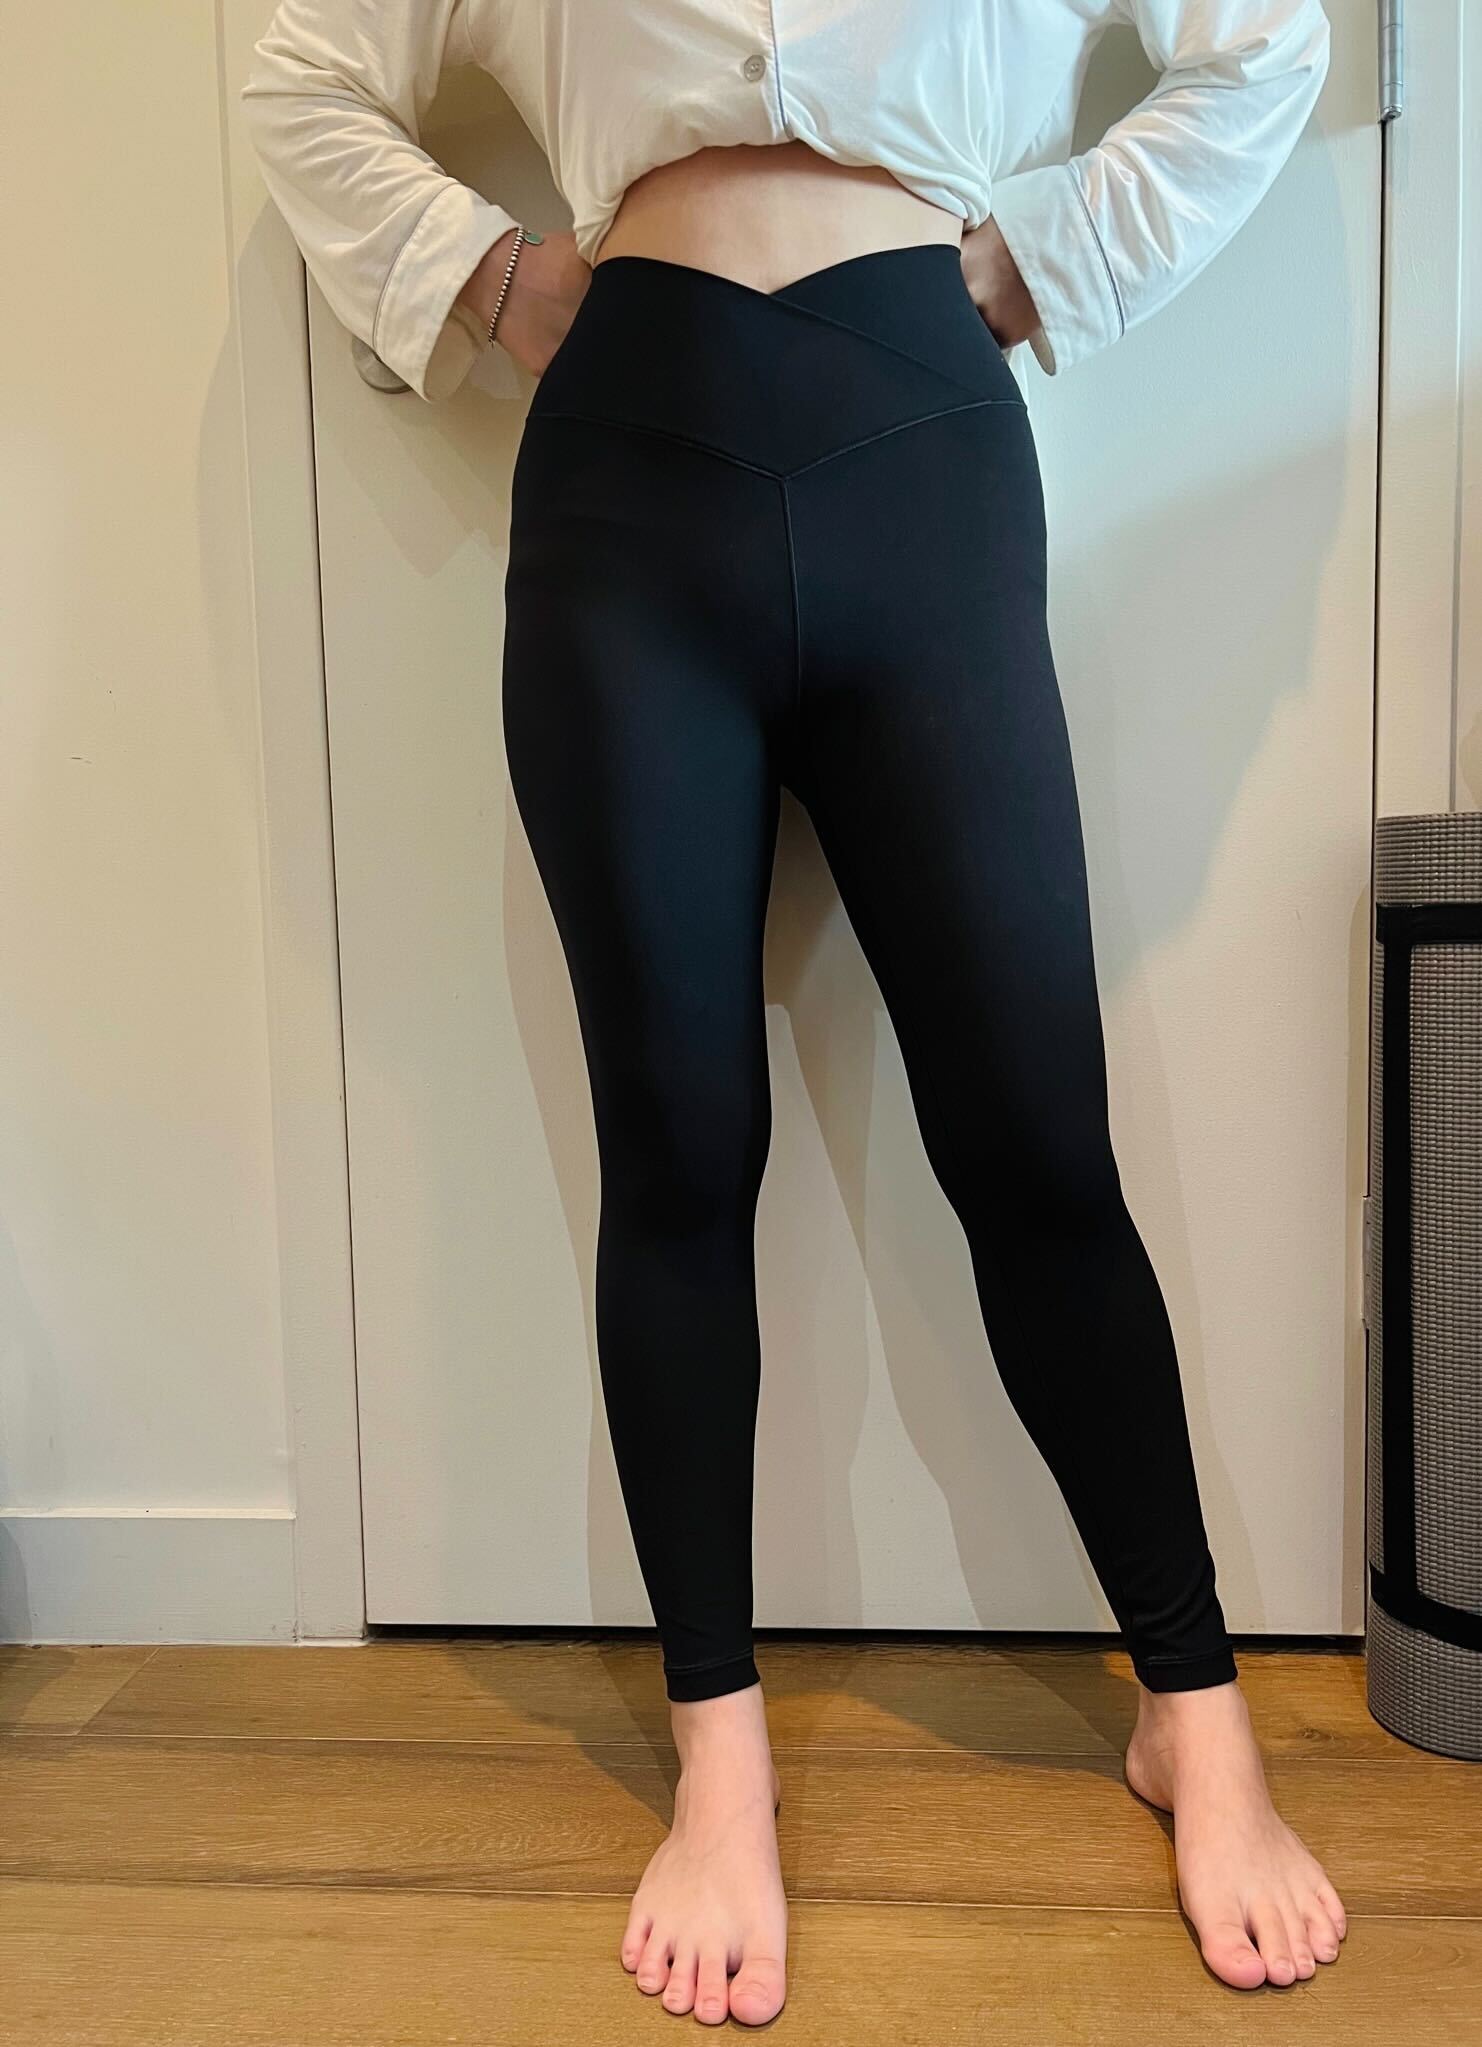 MY FIRST TIME TRYING AERIE  testing the viral crossover yoga pants,  front seams?!, honest review 